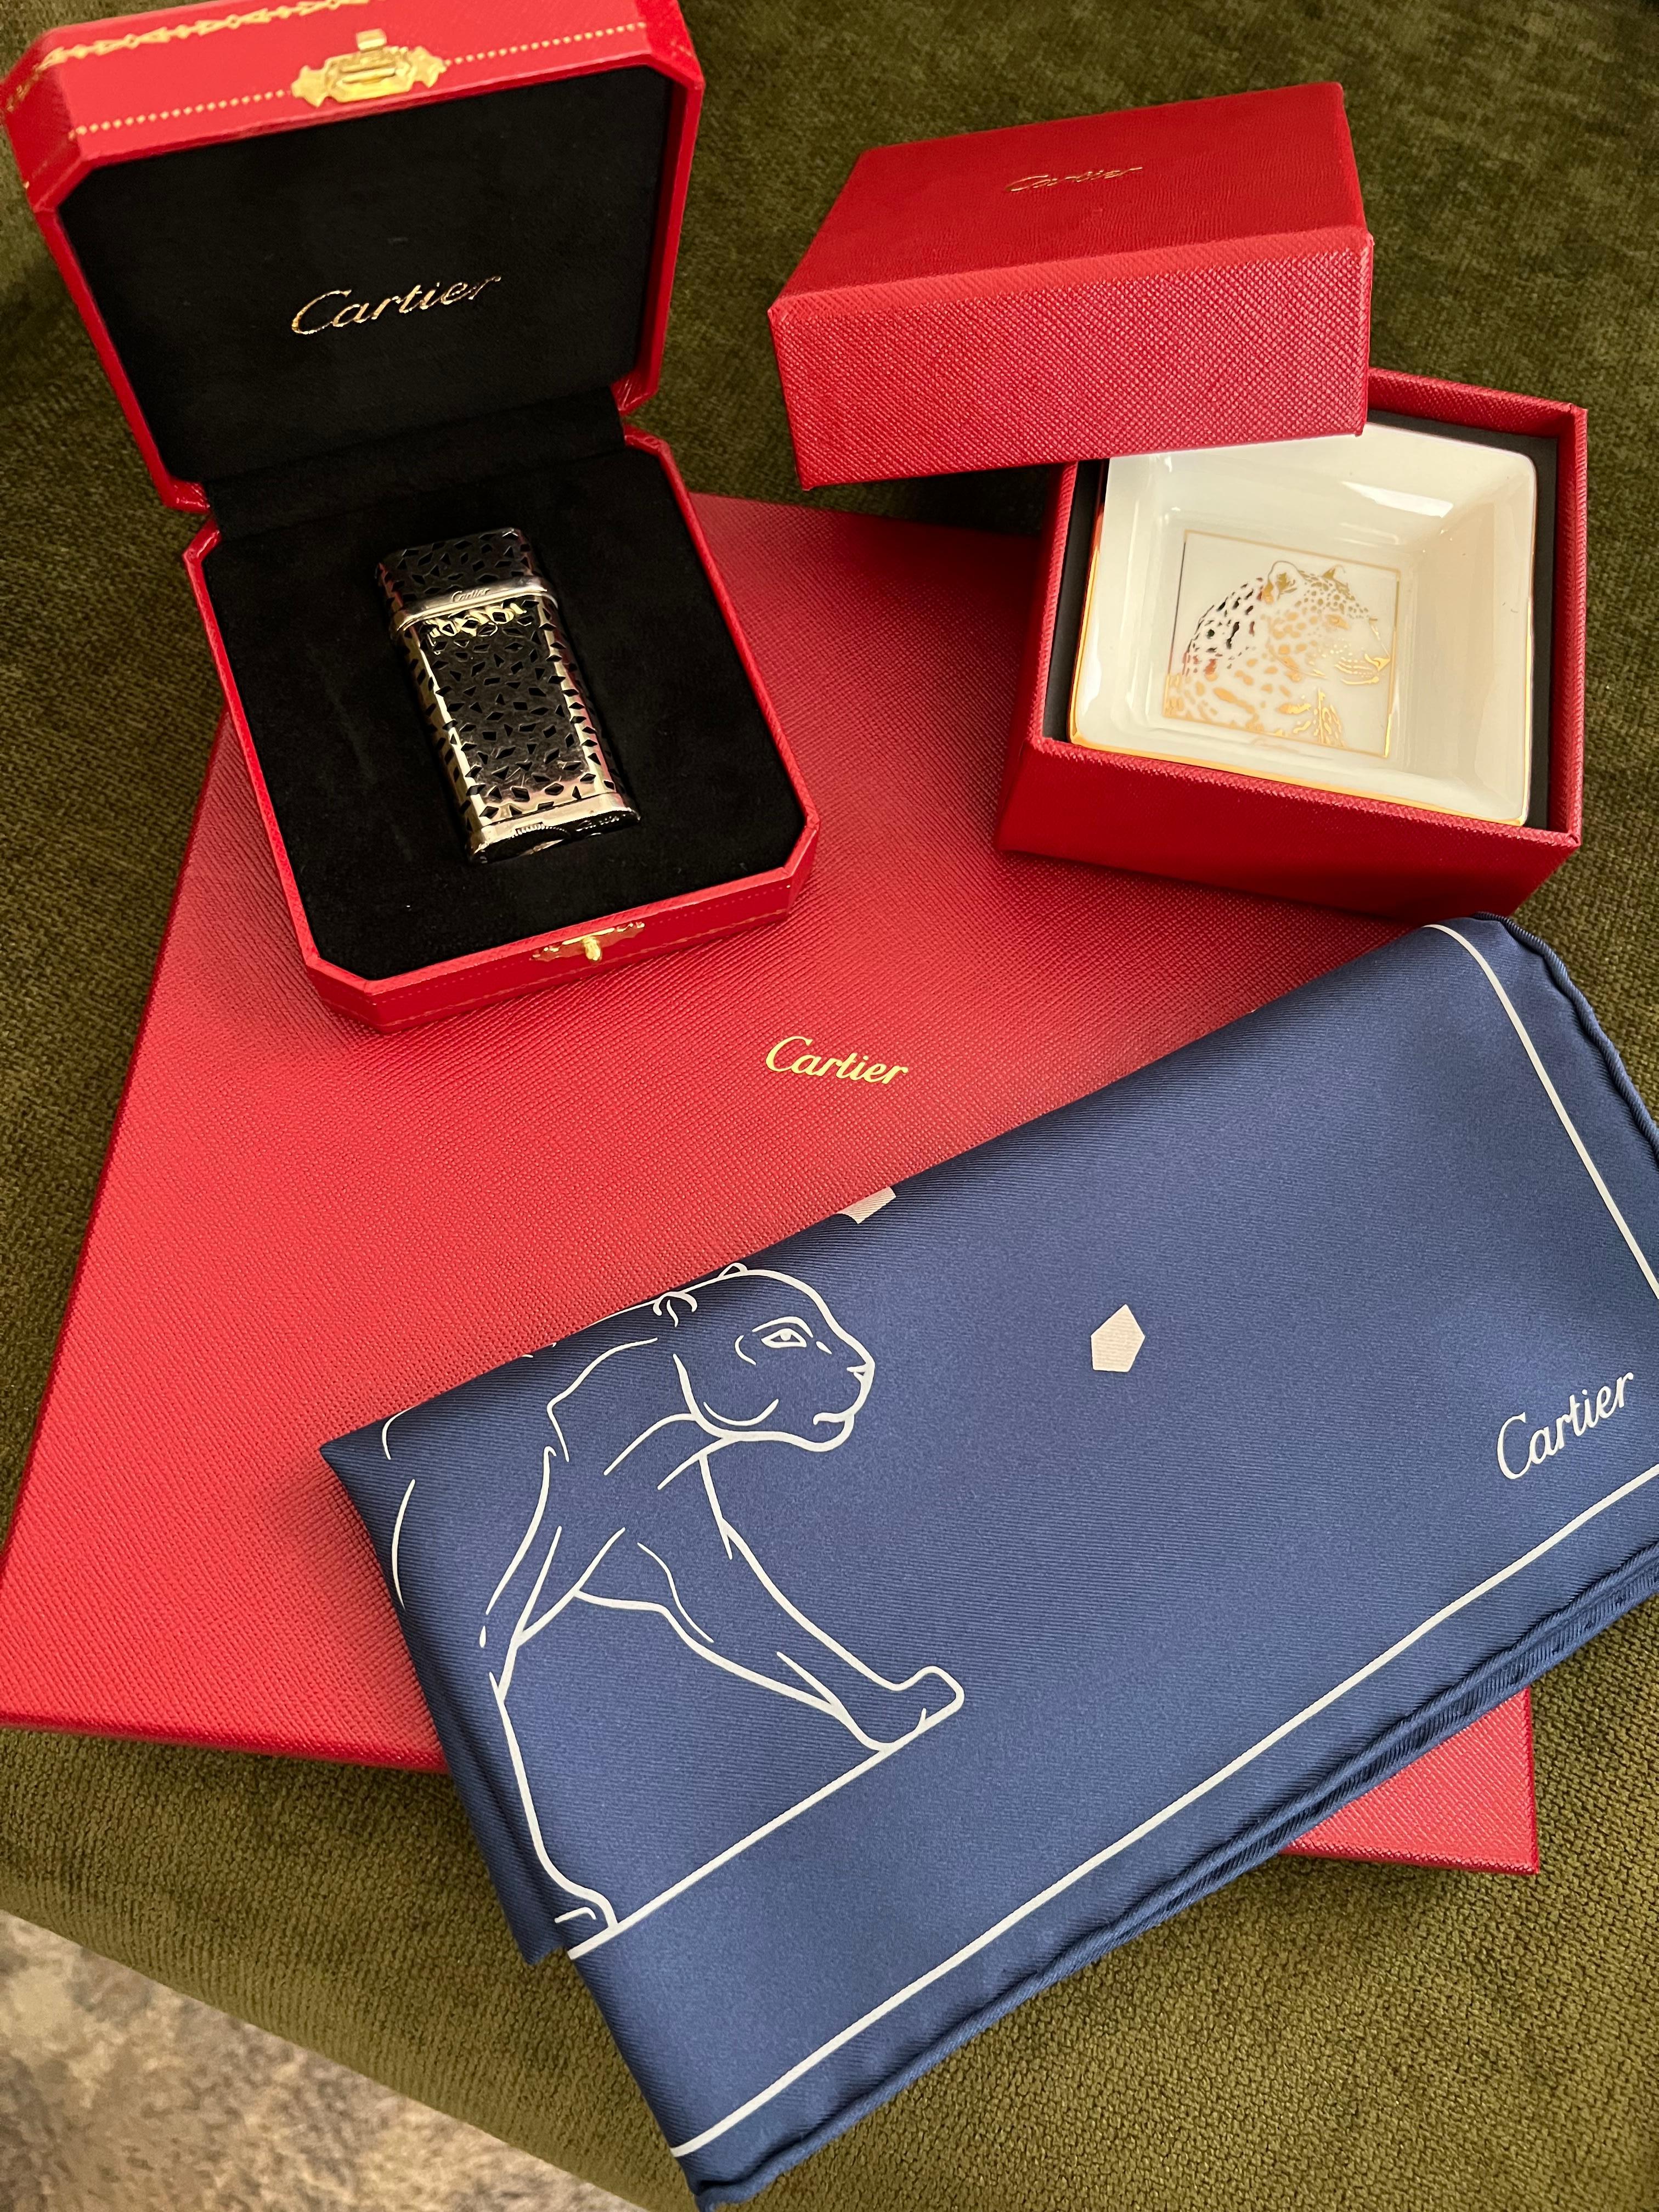 Cartier “Panthera“ Set of Lighter, Ashtray & Silk Scarf For Sale 1